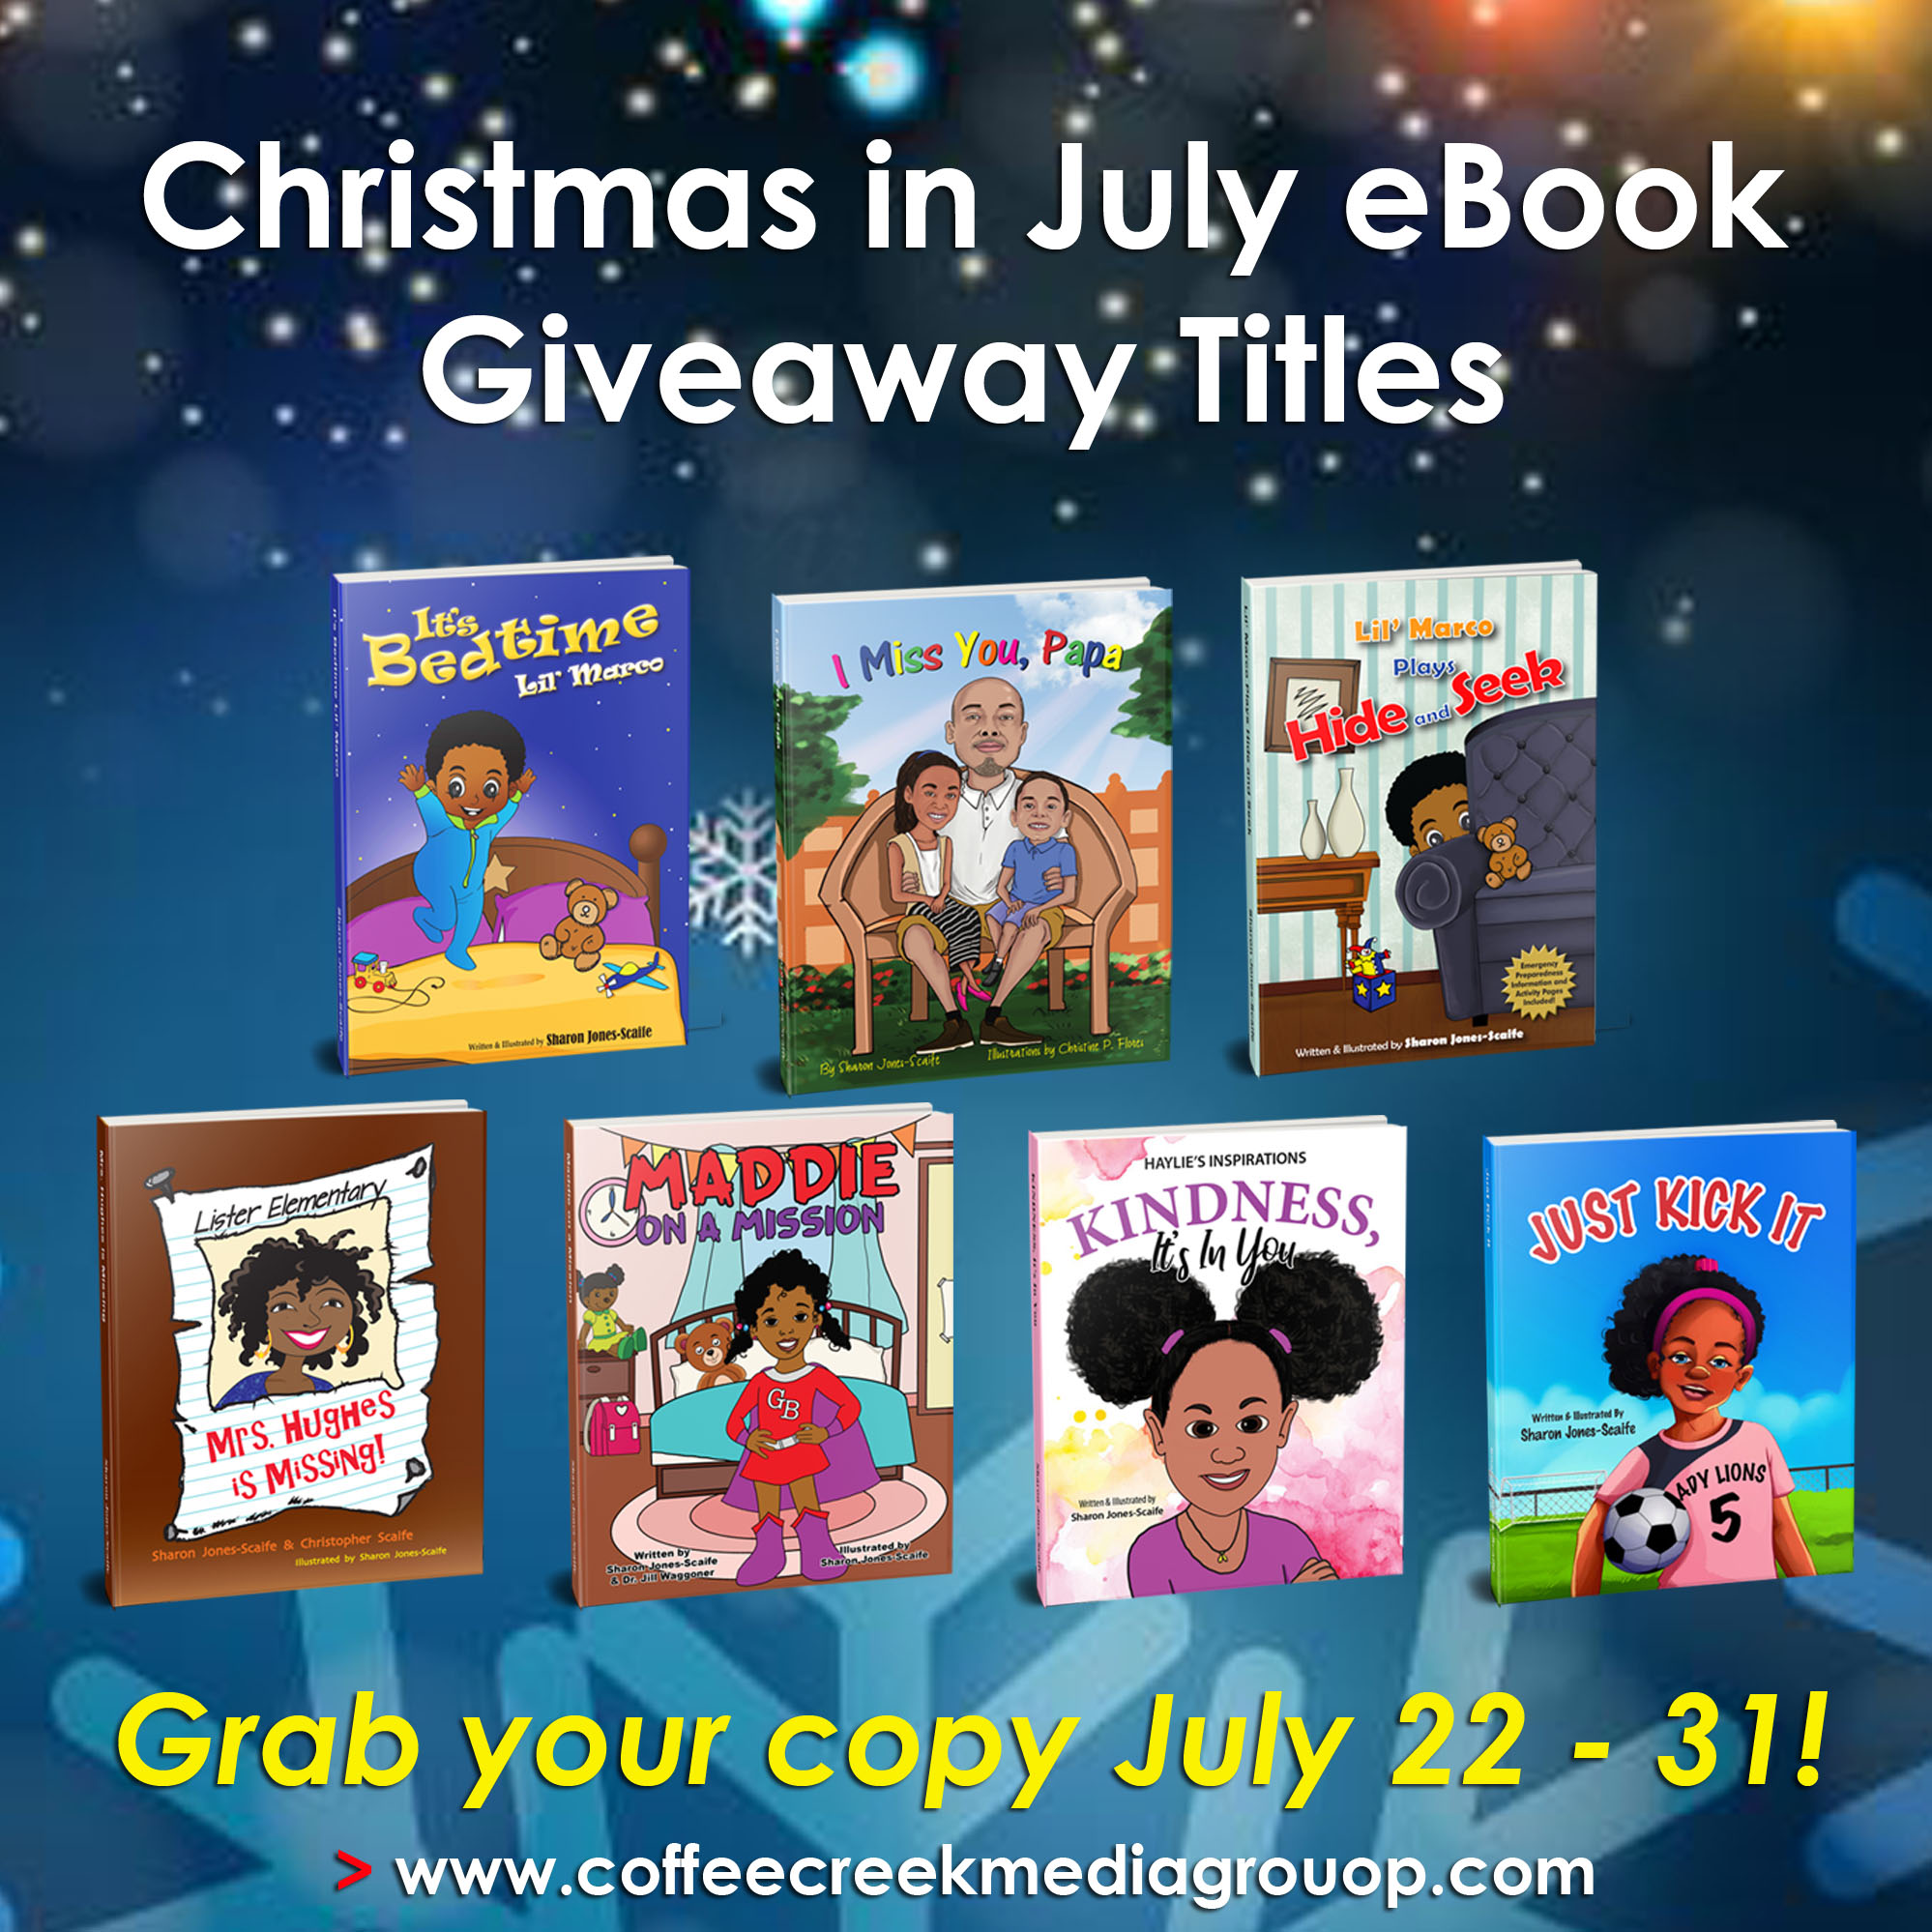 LAST DAYS OF CHRISTMAS IN JULY eBOOK GIVEAWAY